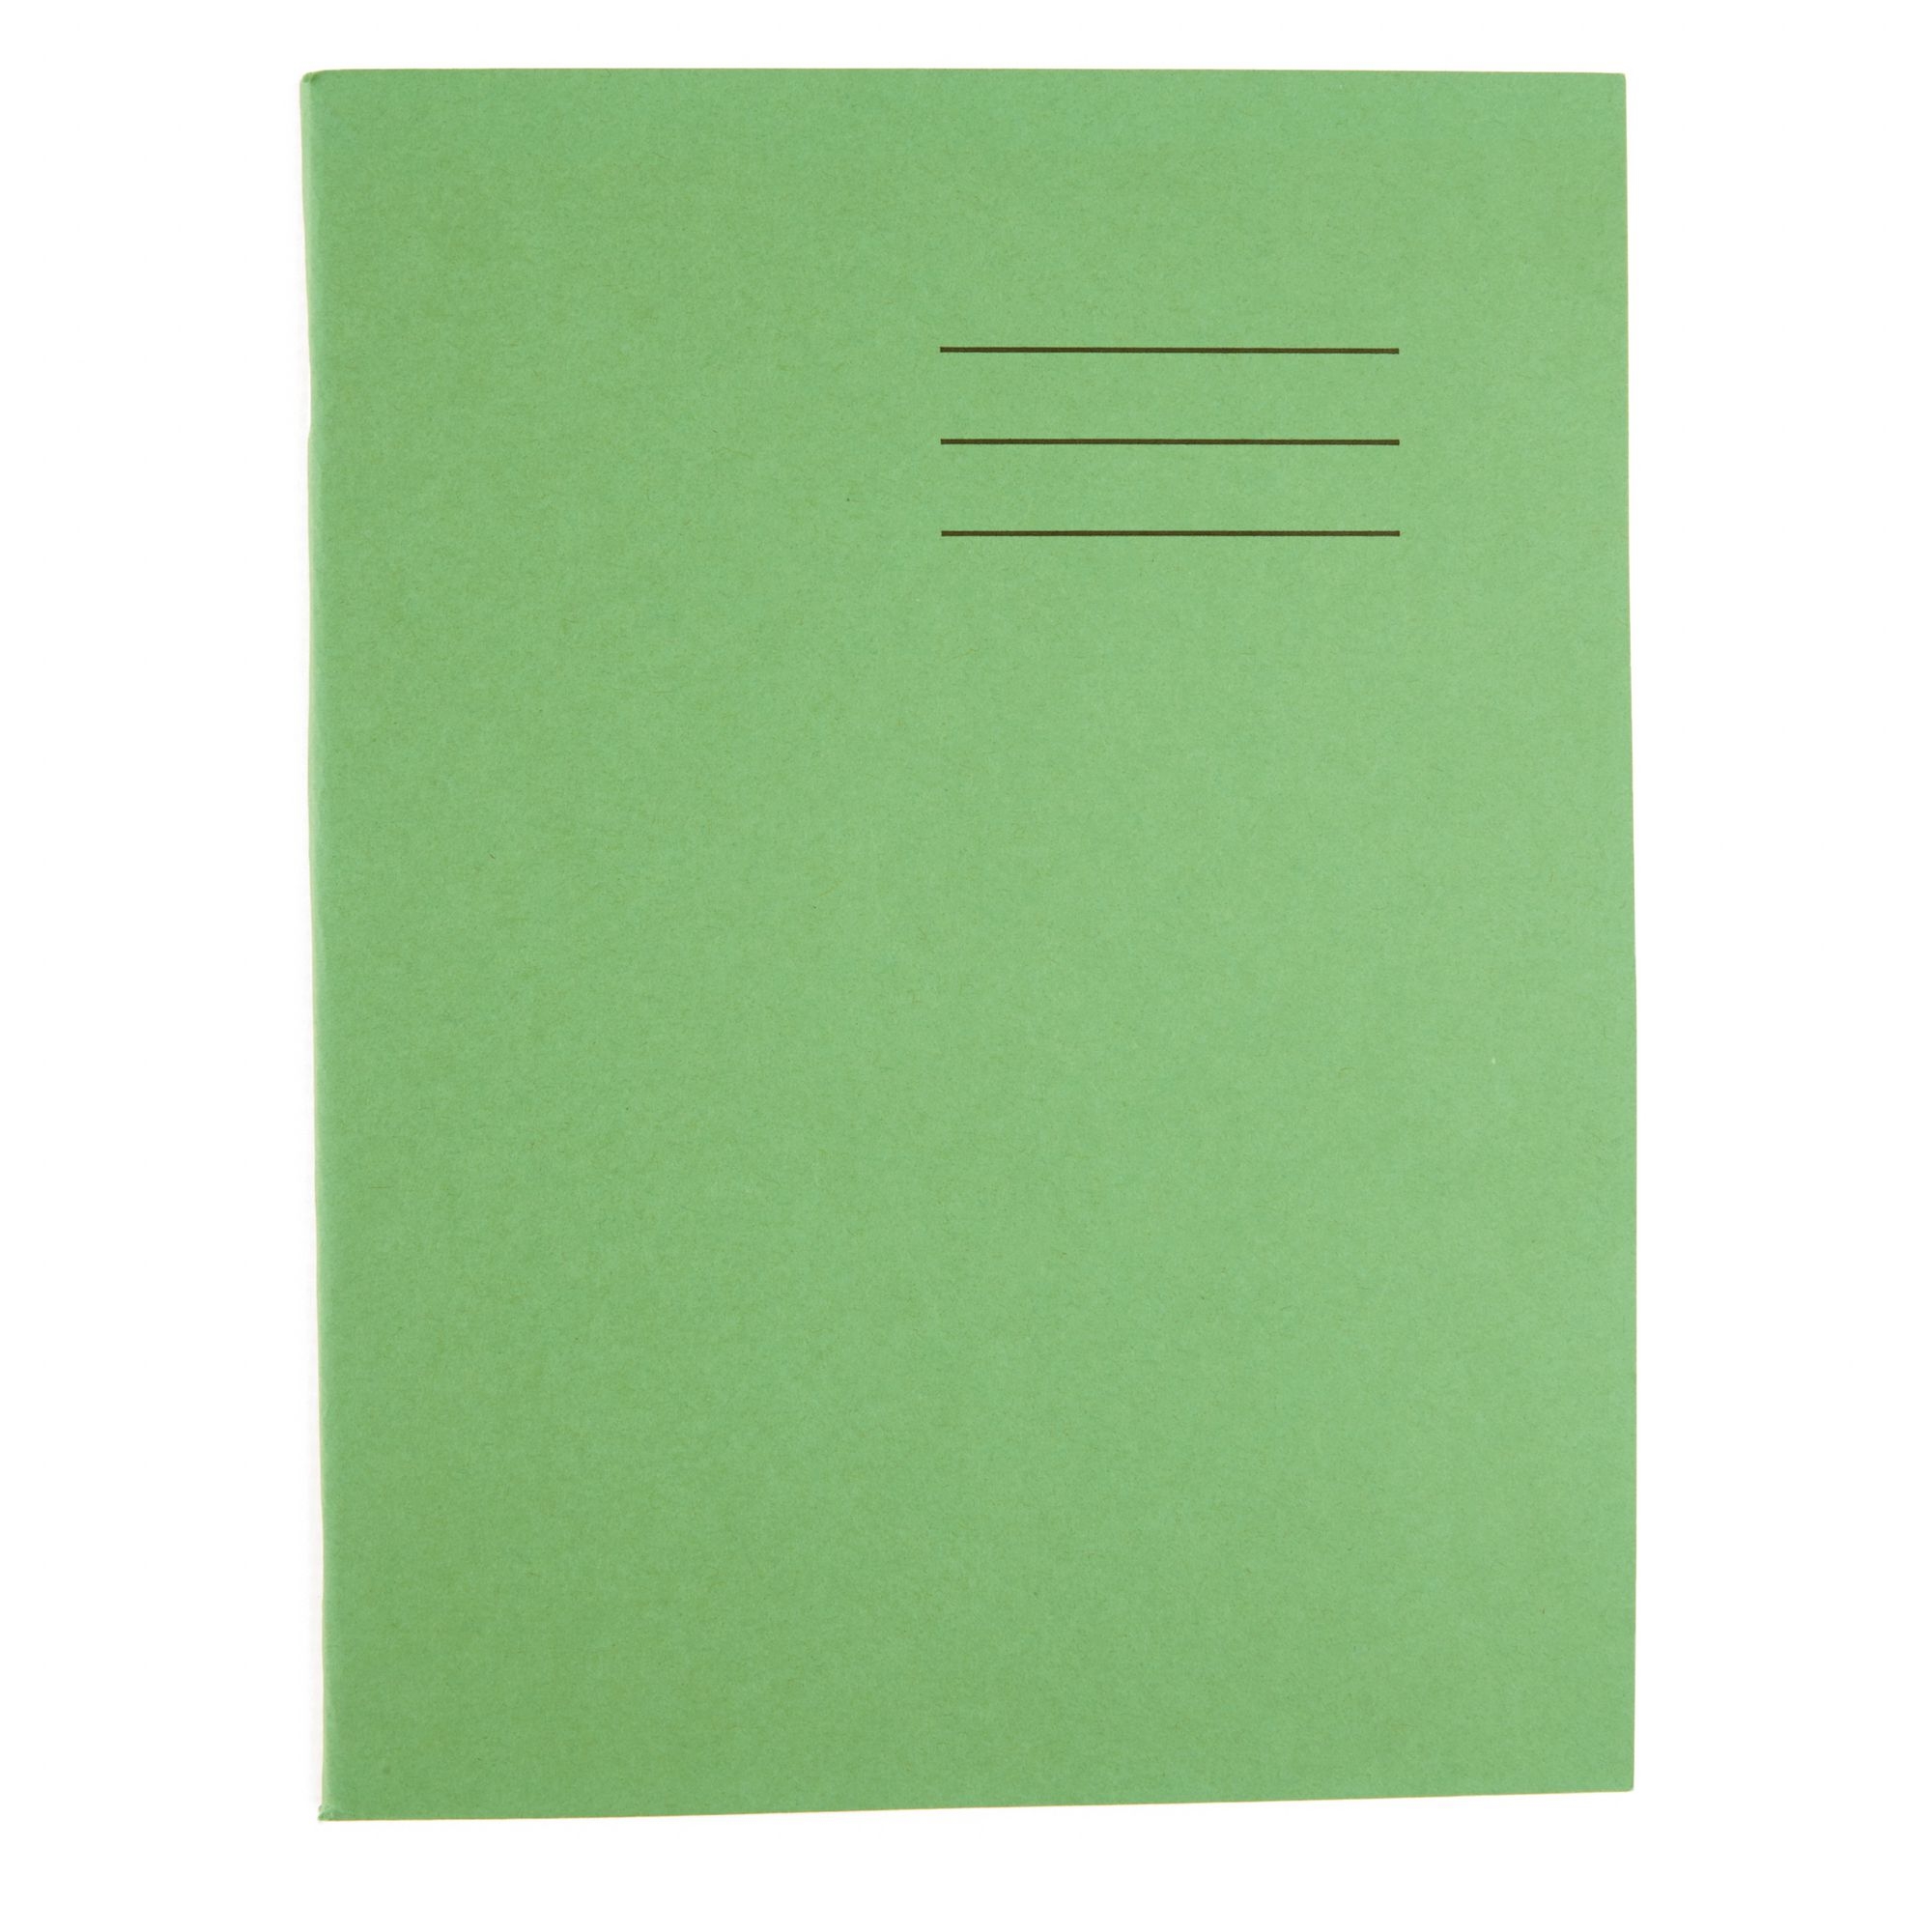 9x7 Exercise Book 48 Page, 8mm Ruled with Margin, Light Green - Pack of 100